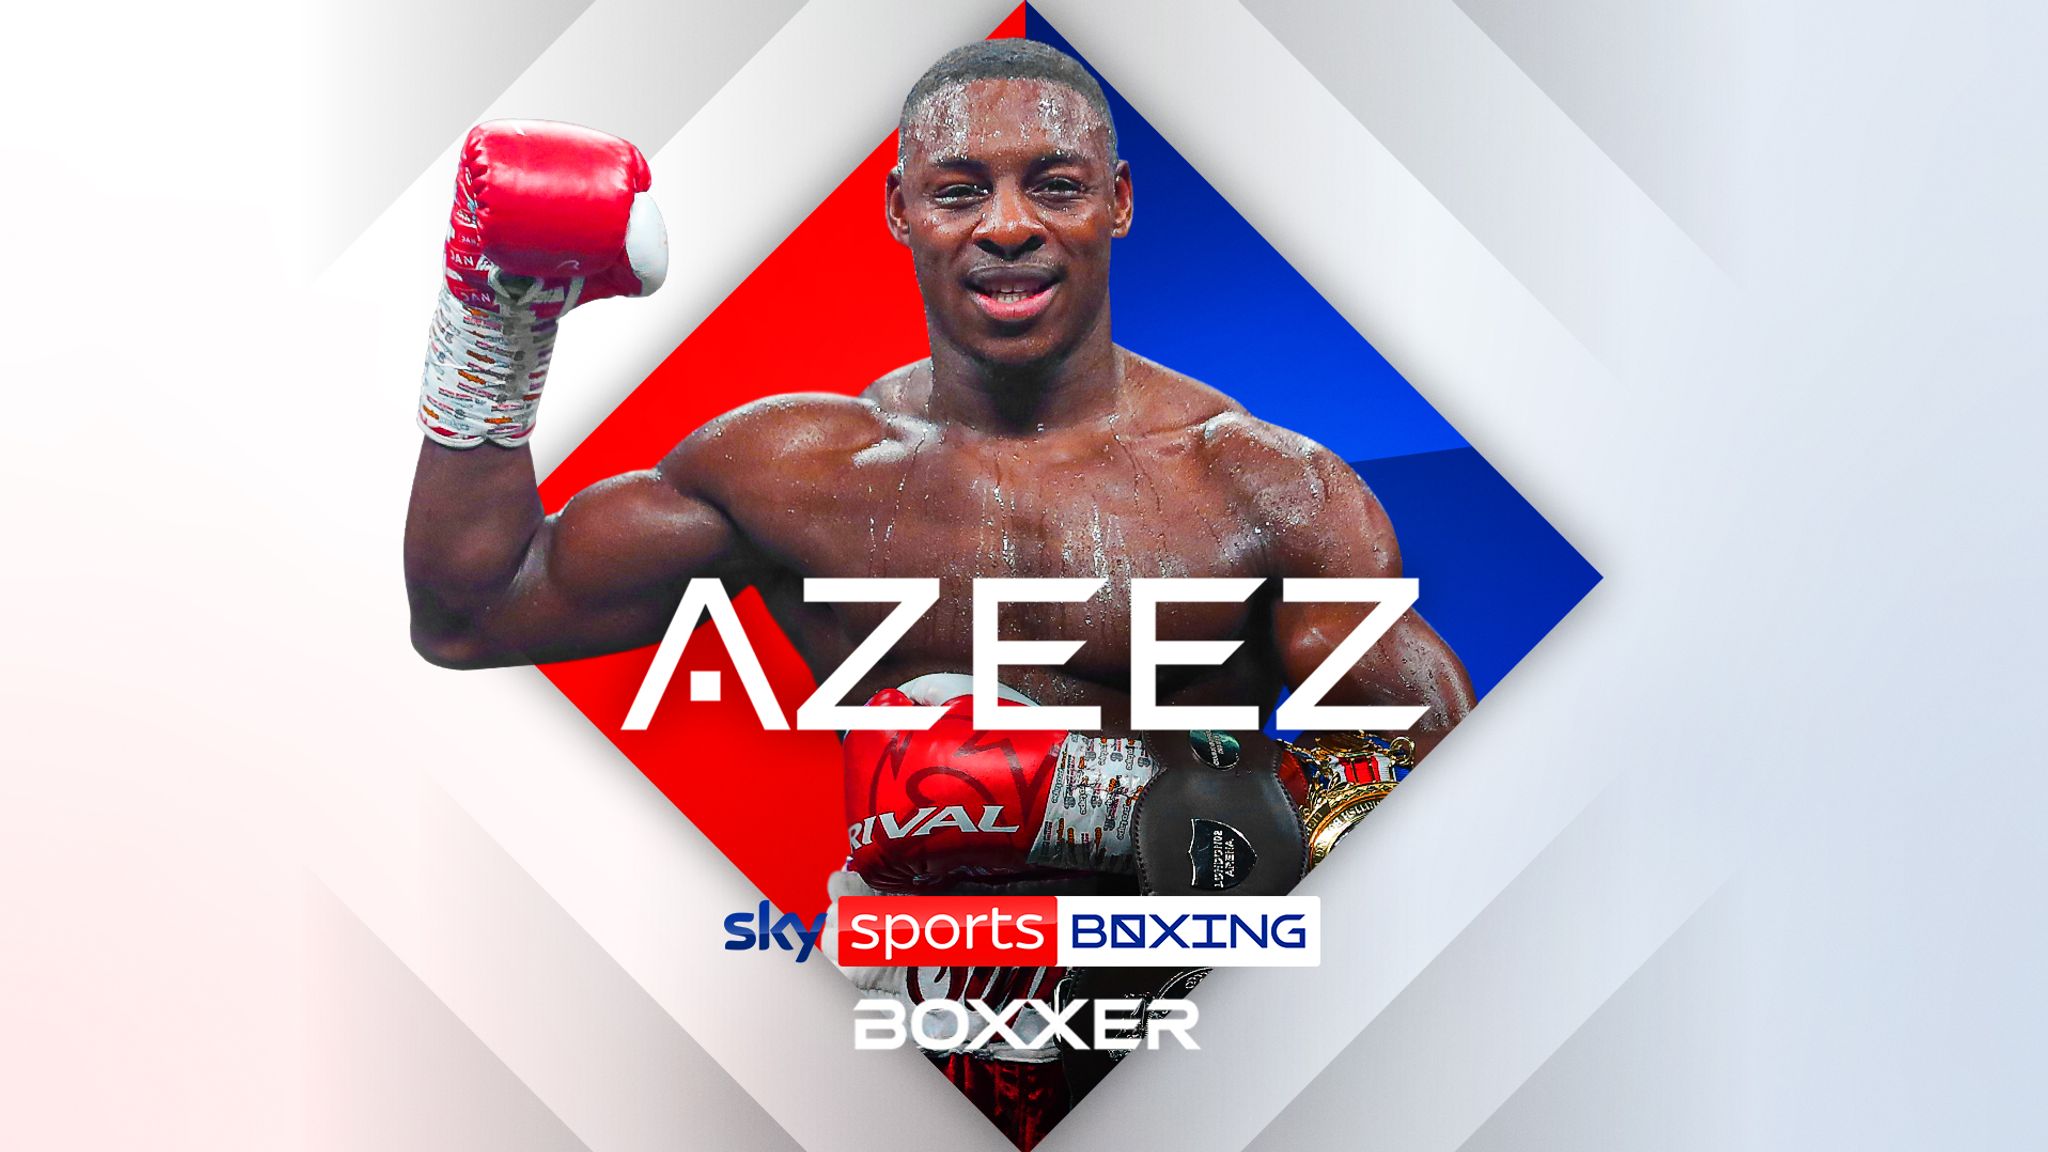 Dan Azeez signs exclusive long-term promotional deal with BOXXER Boxing News Sky Sports